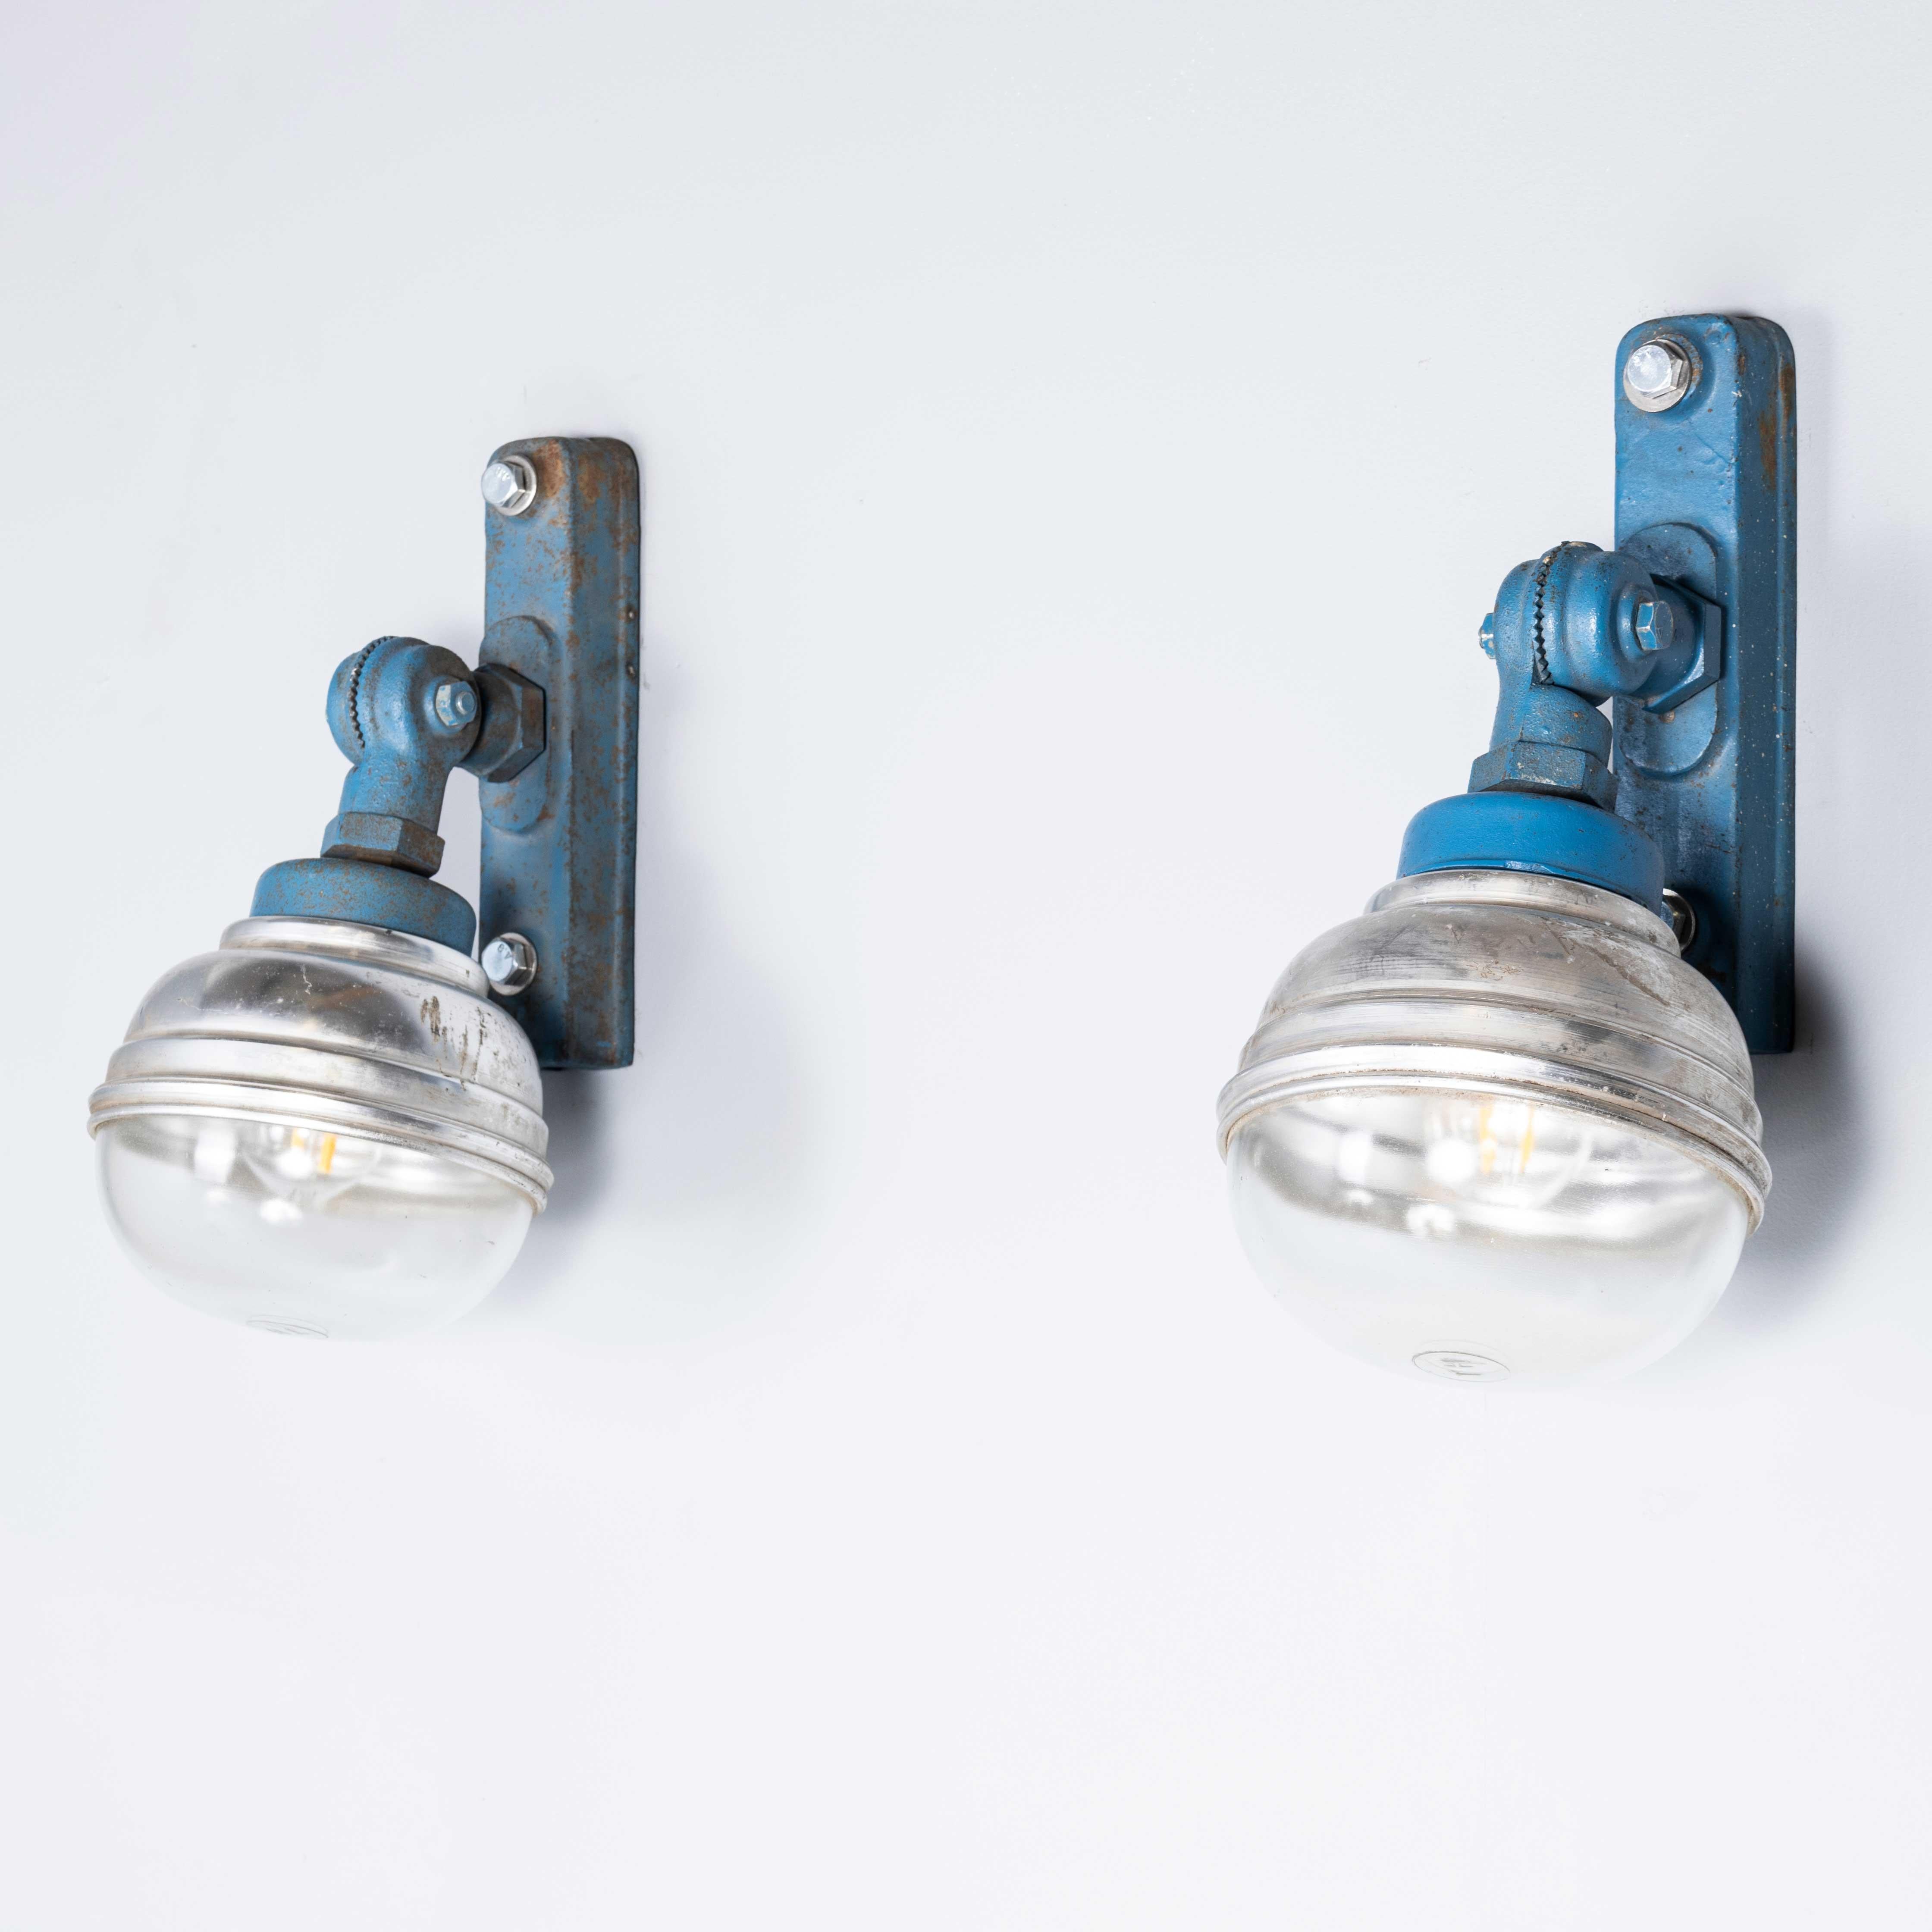 1950’s Adjustable Holophane Industrial Steel Wall Lamps – Pair
1950’s Adjustable Industrial Steel Wall Lamps – Pair. Sourced from a mechanics garage in the south east of France these lamps hung proudly on the entrance façade of the garage.
The bases